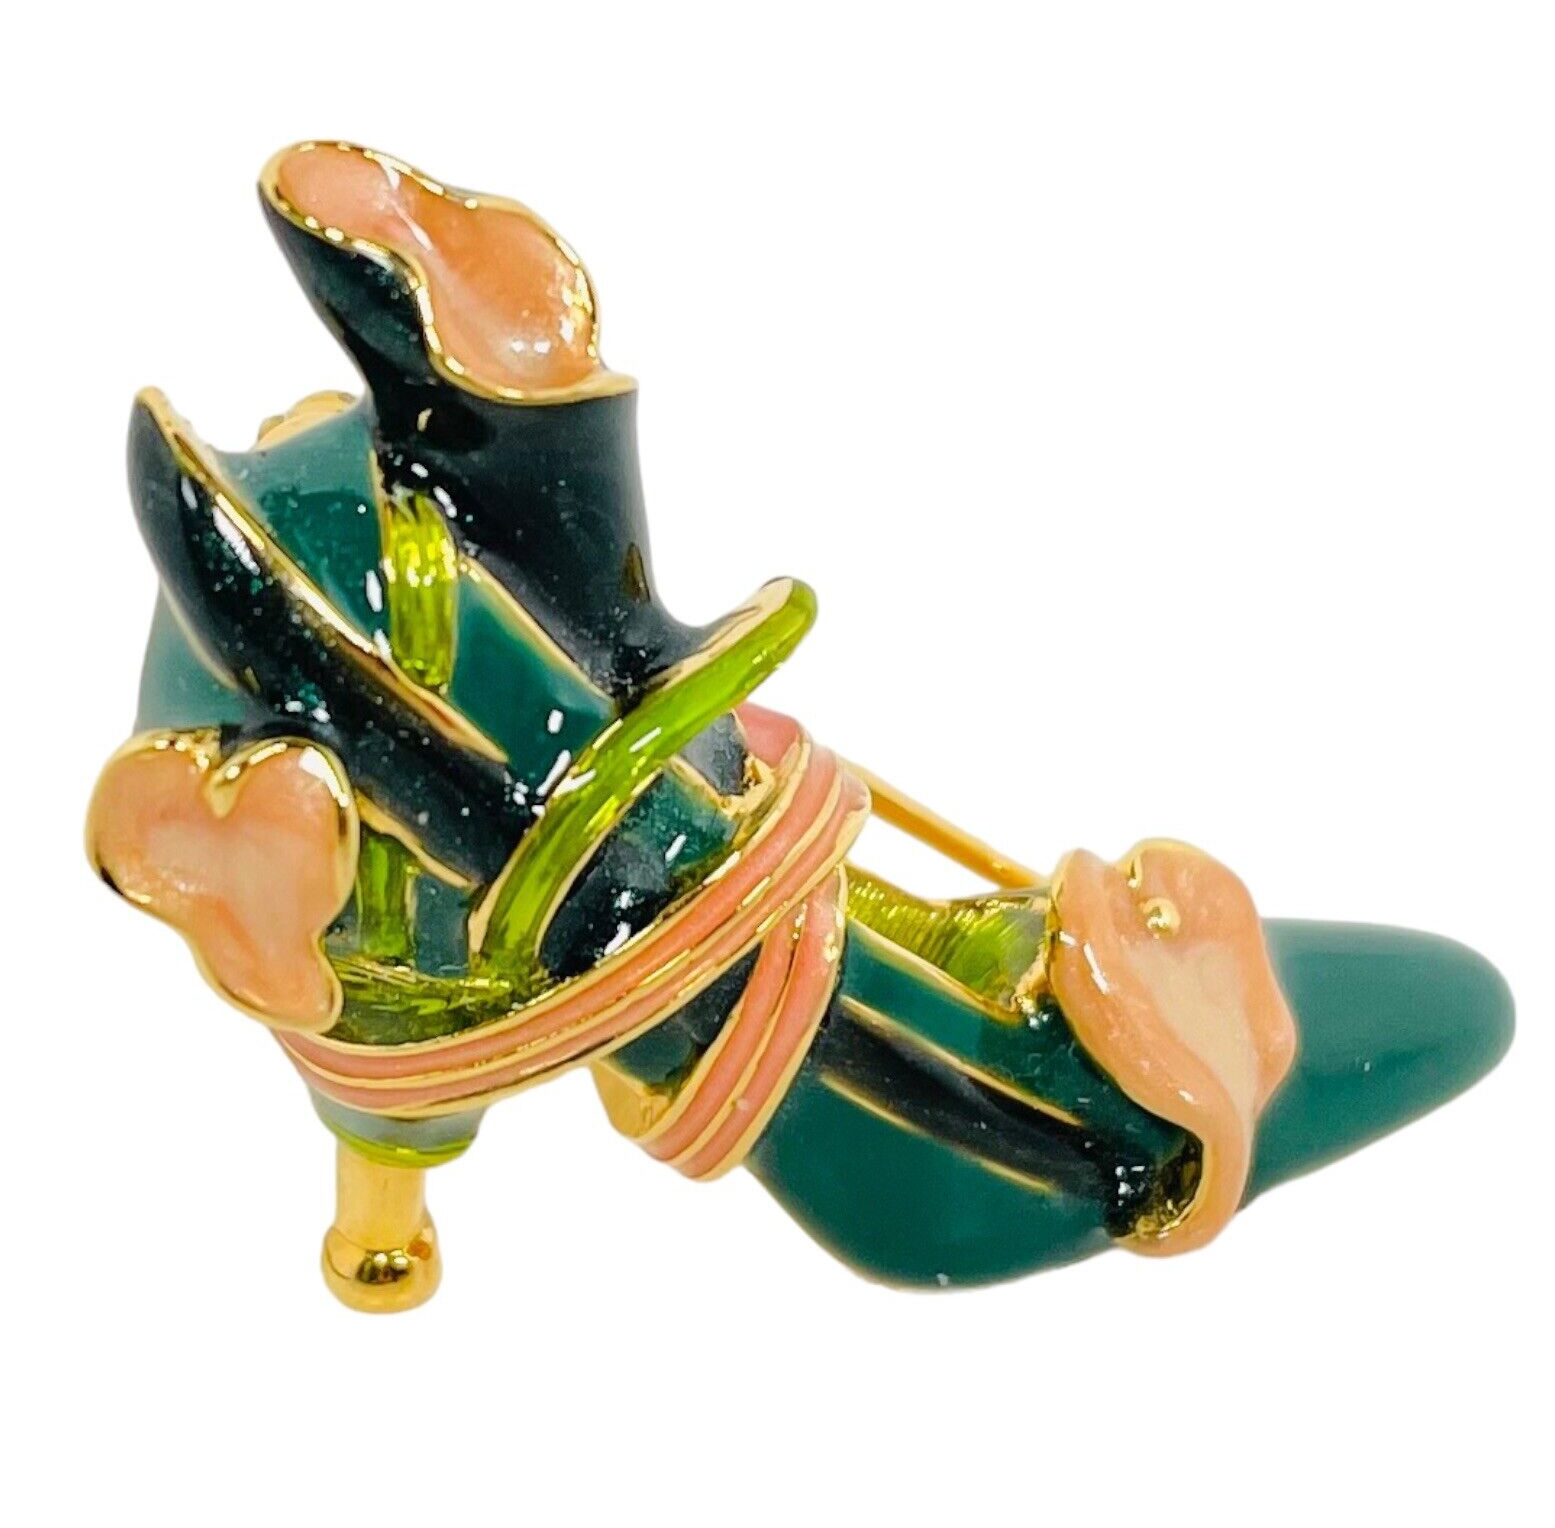 KJL Kenneth Jay Lane For the Cause Shoe Brooch Pin Green Calla Lillie 1 1/2" - $13.10